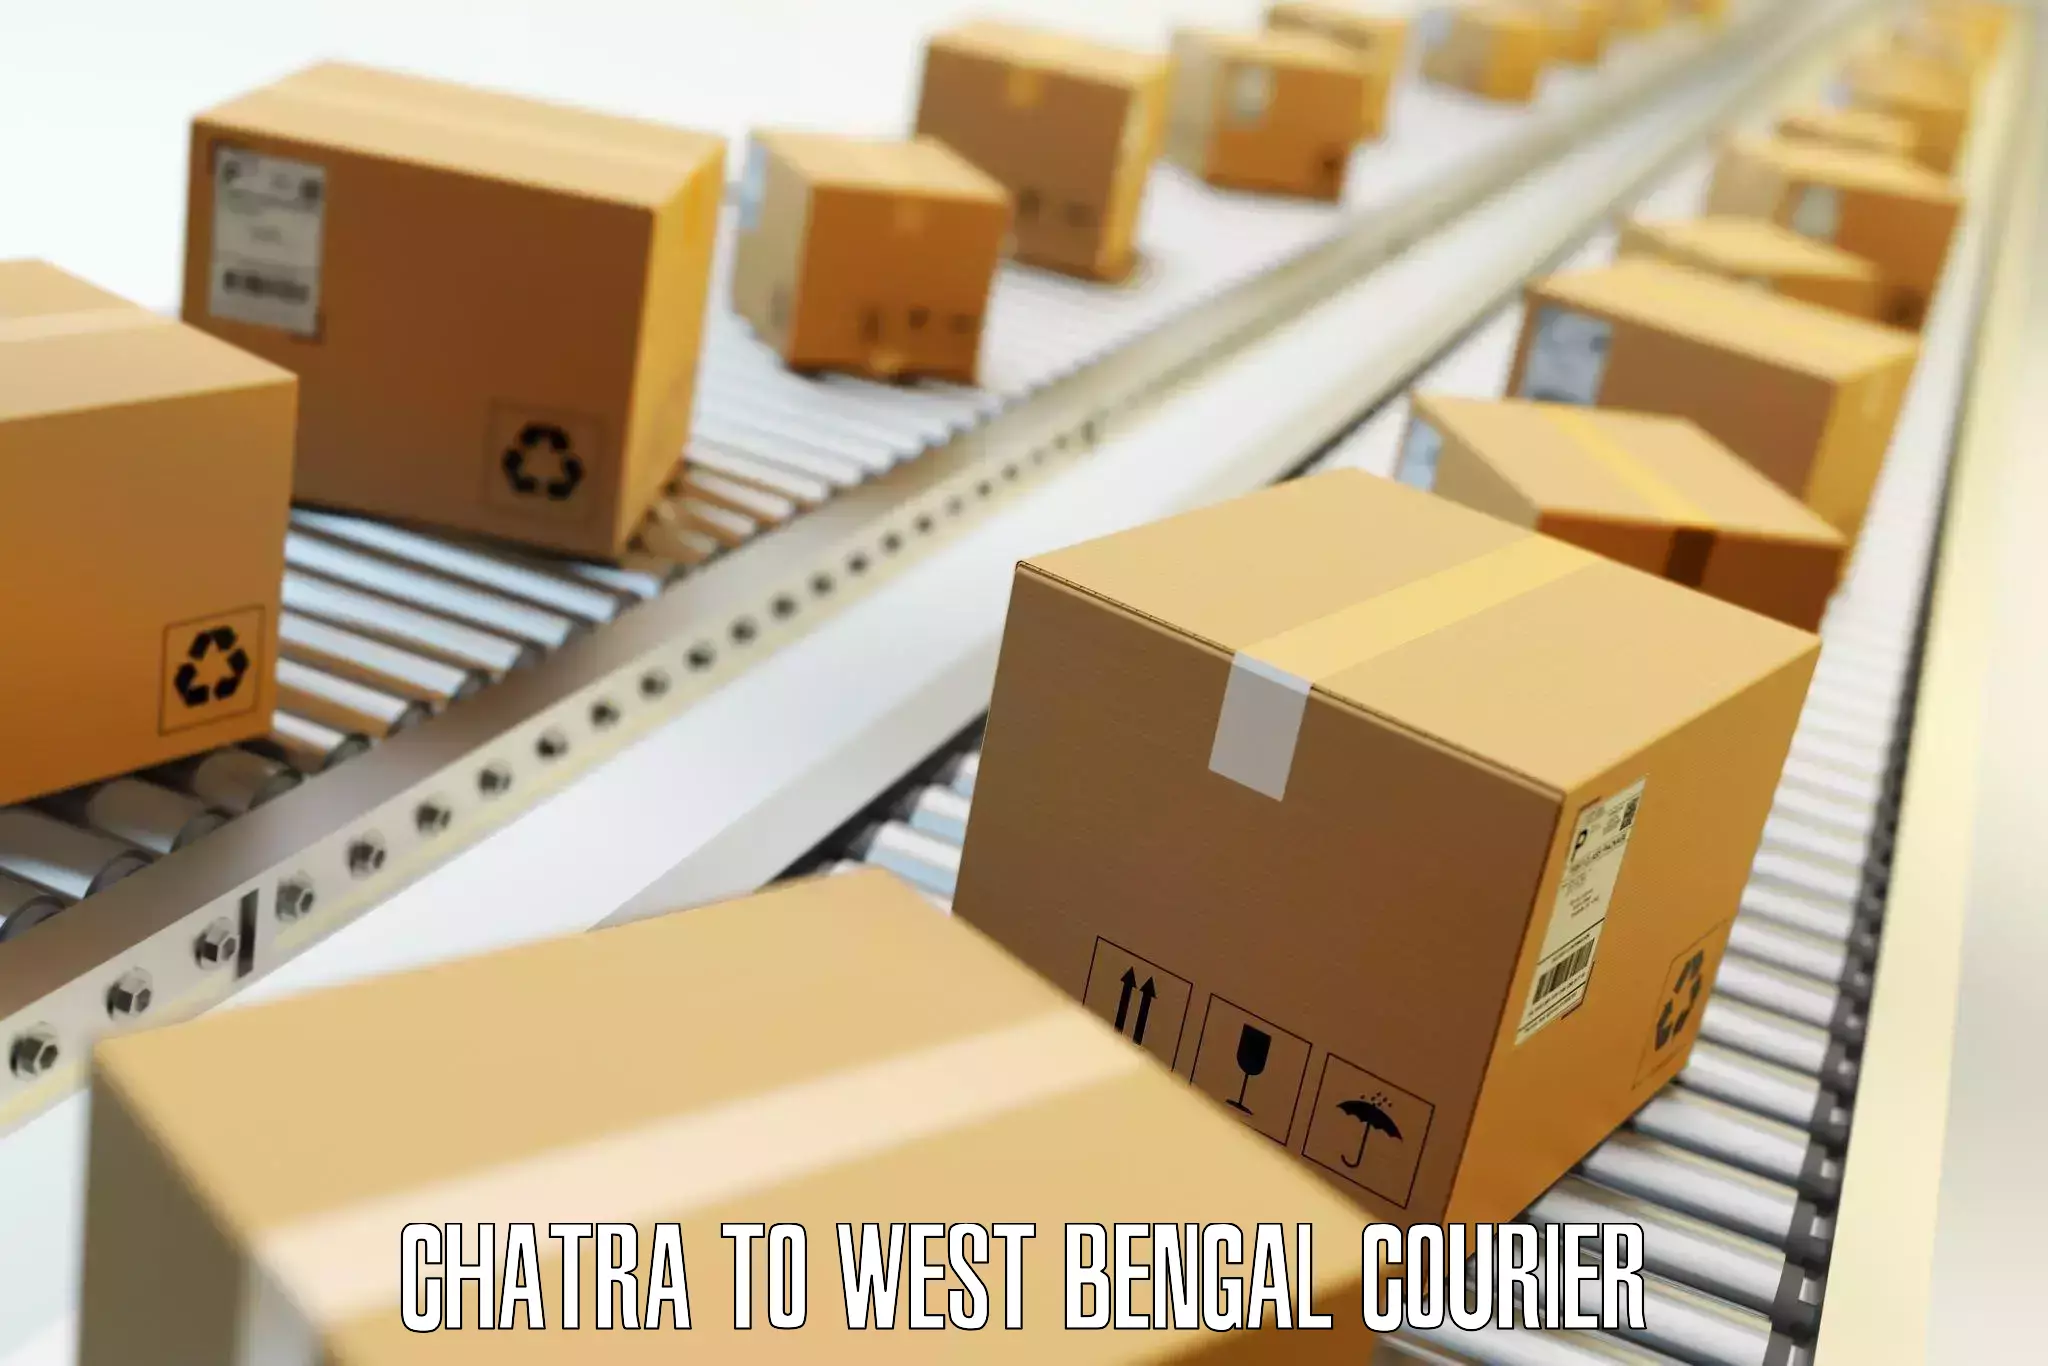 Luggage transit service Chatra to West Bengal